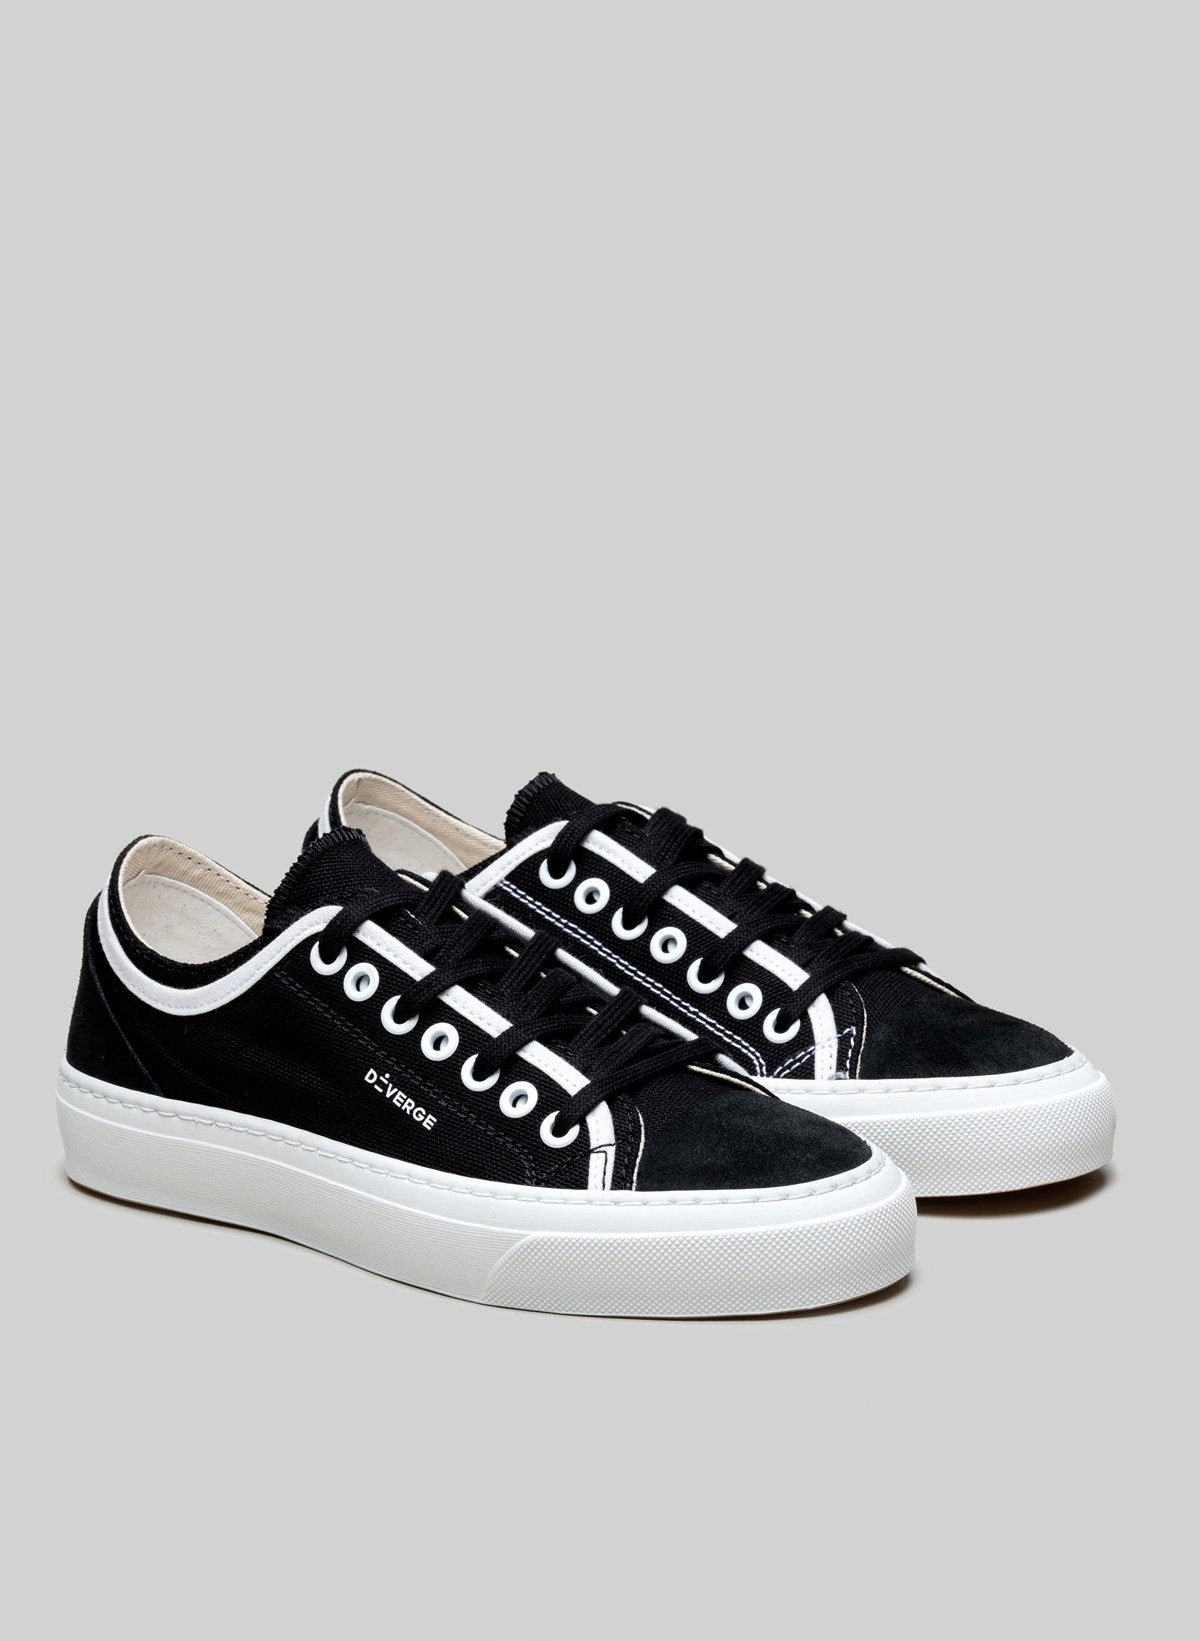 Low top white and black sneakers by Diverge, promoting social impact and custom shoes.